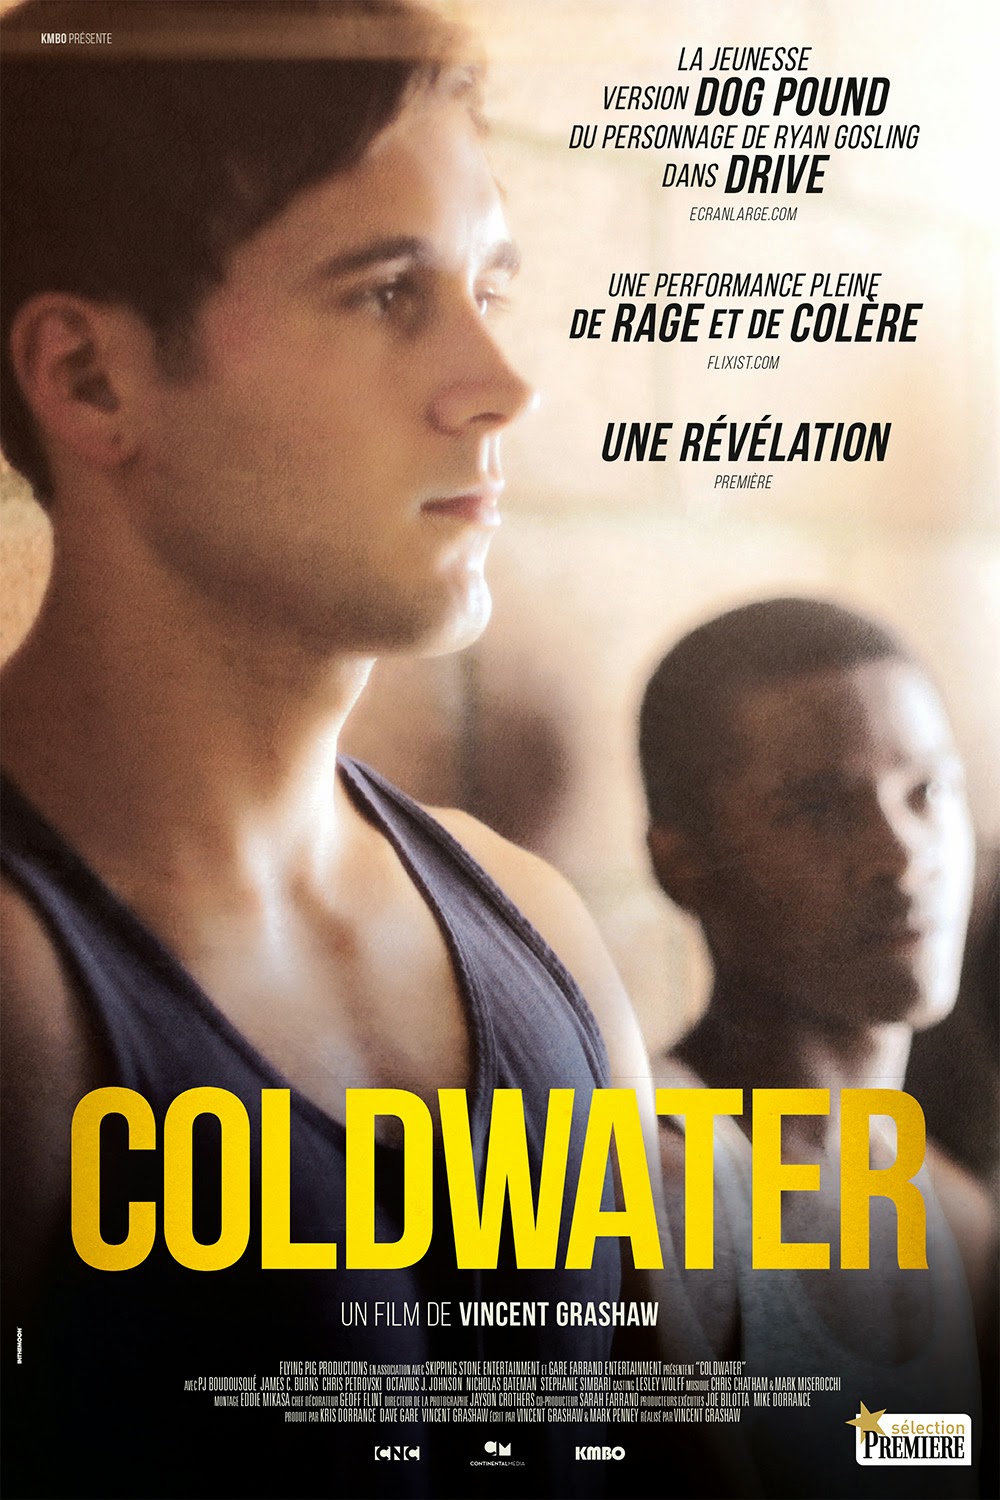 http://fuckingcinephiles.blogspot.fr/2014/07/critique-coldwater.html